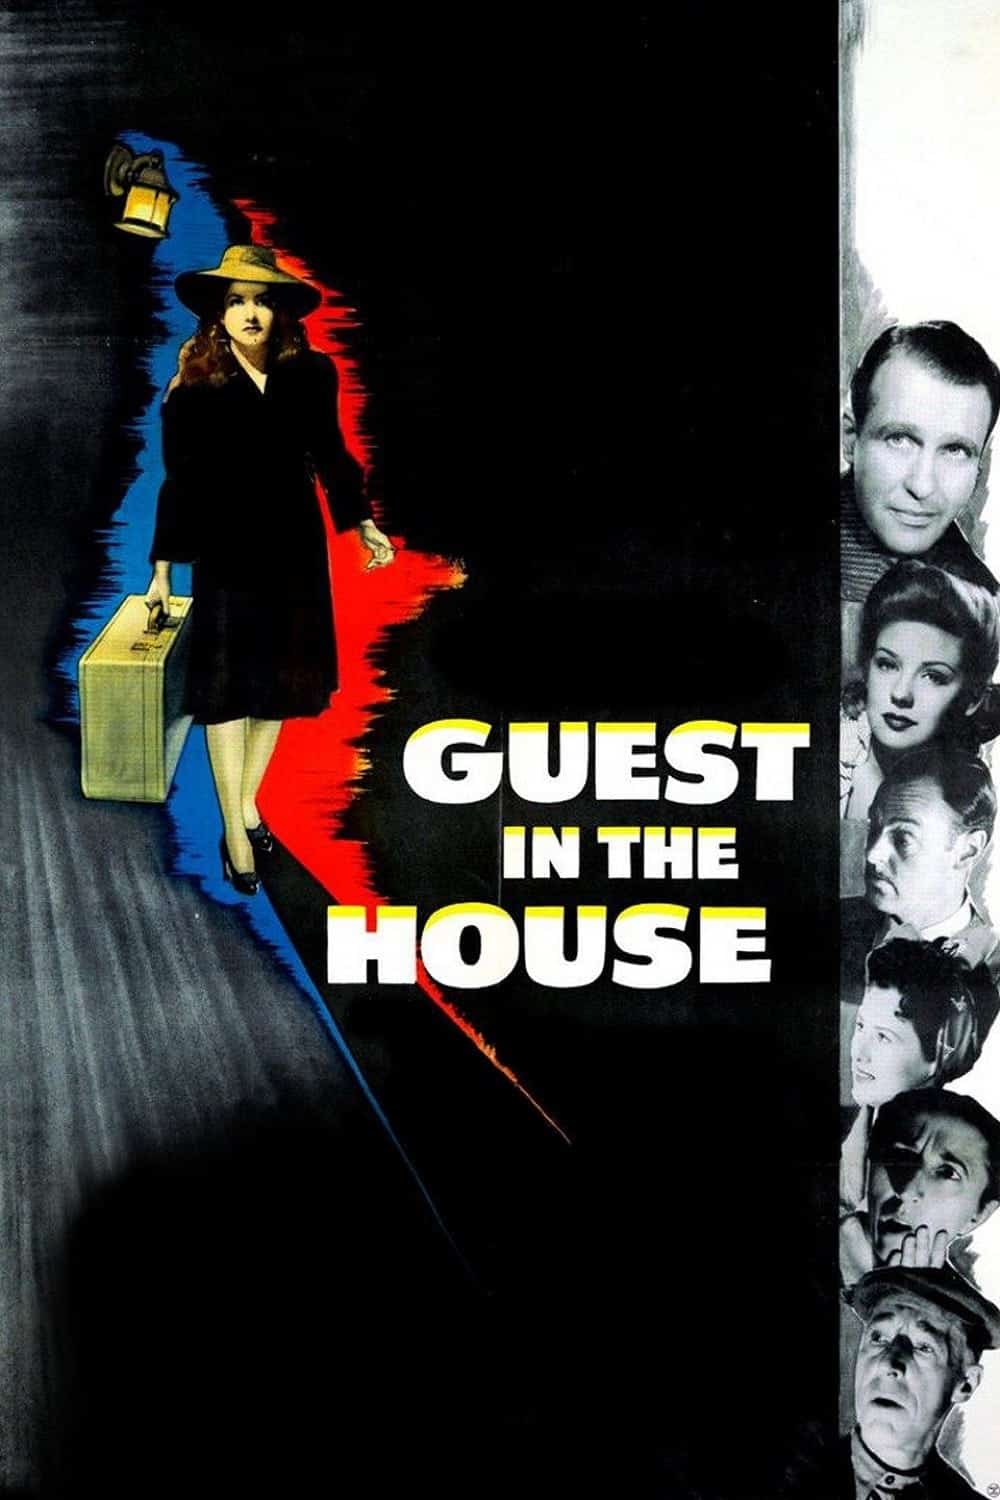 Poster for the movie "Guest in the House"